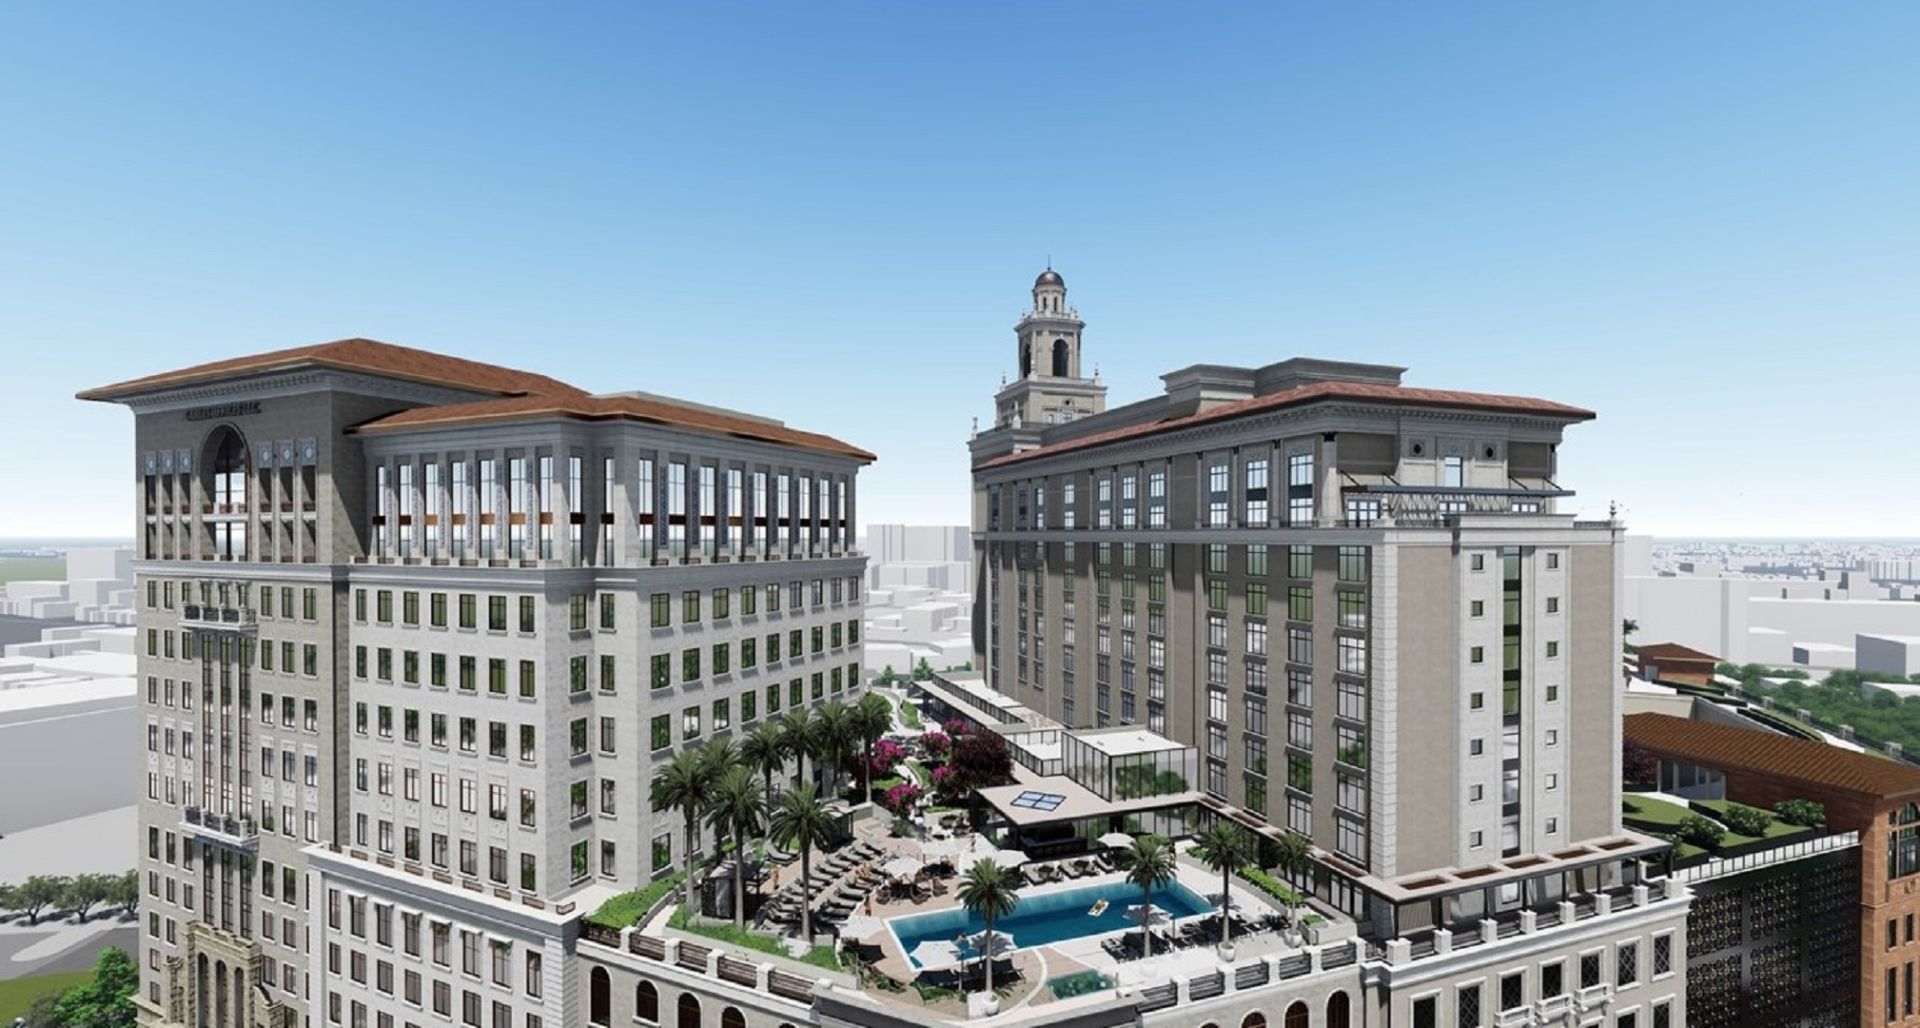 SLoews Coral Gables Hotel exterior with rooftop pool and deck.